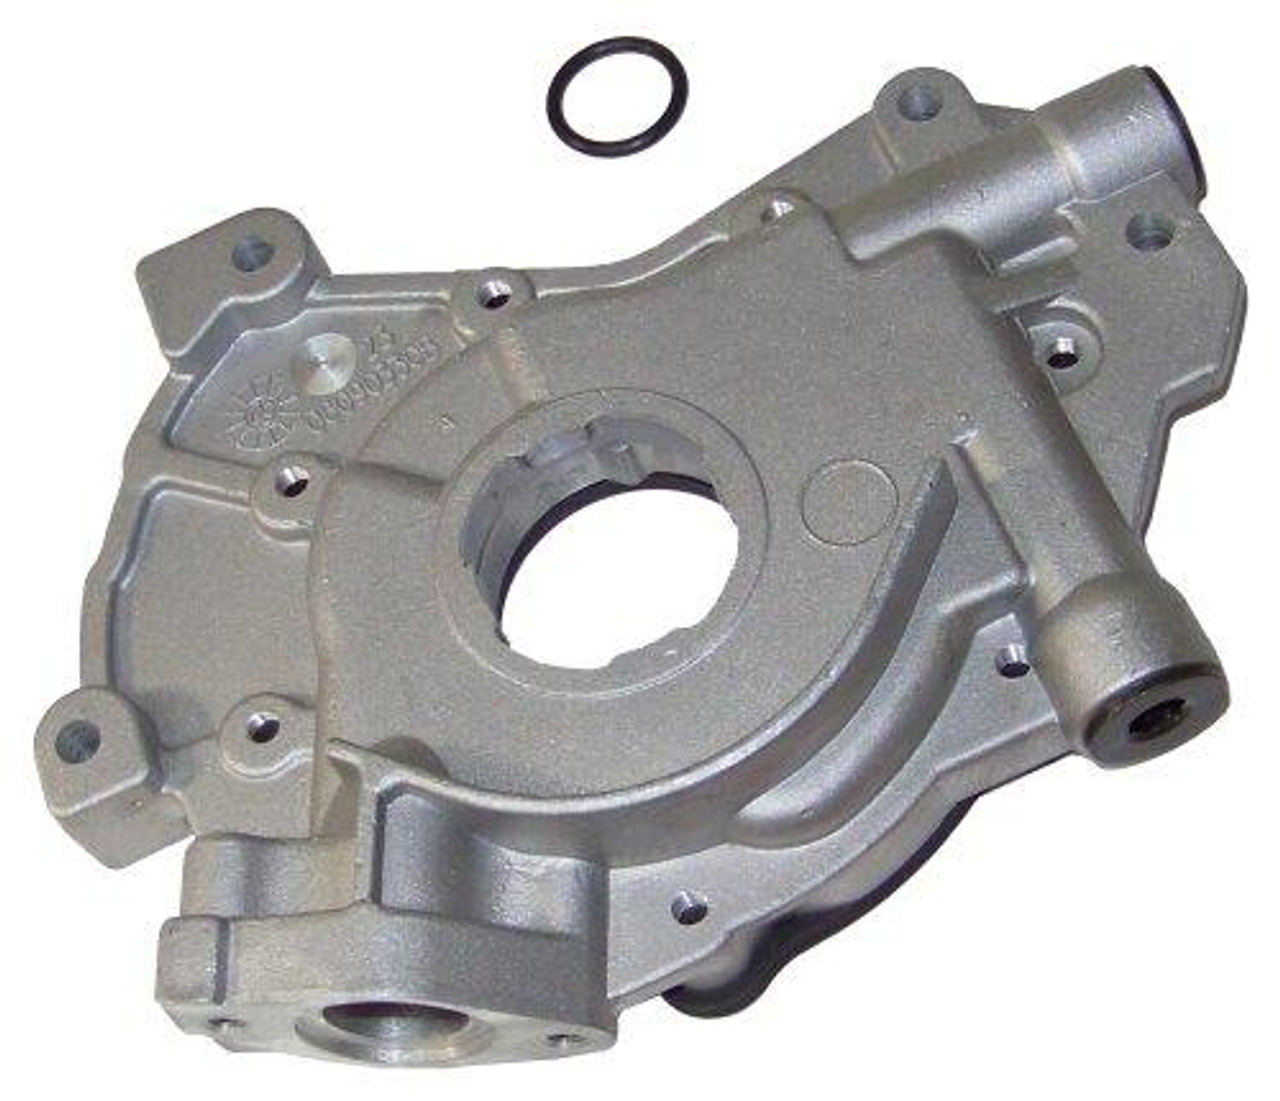 Oil Pump - 2003 Ford Expedition 5.4L Engine Parts # OP4131ZE195